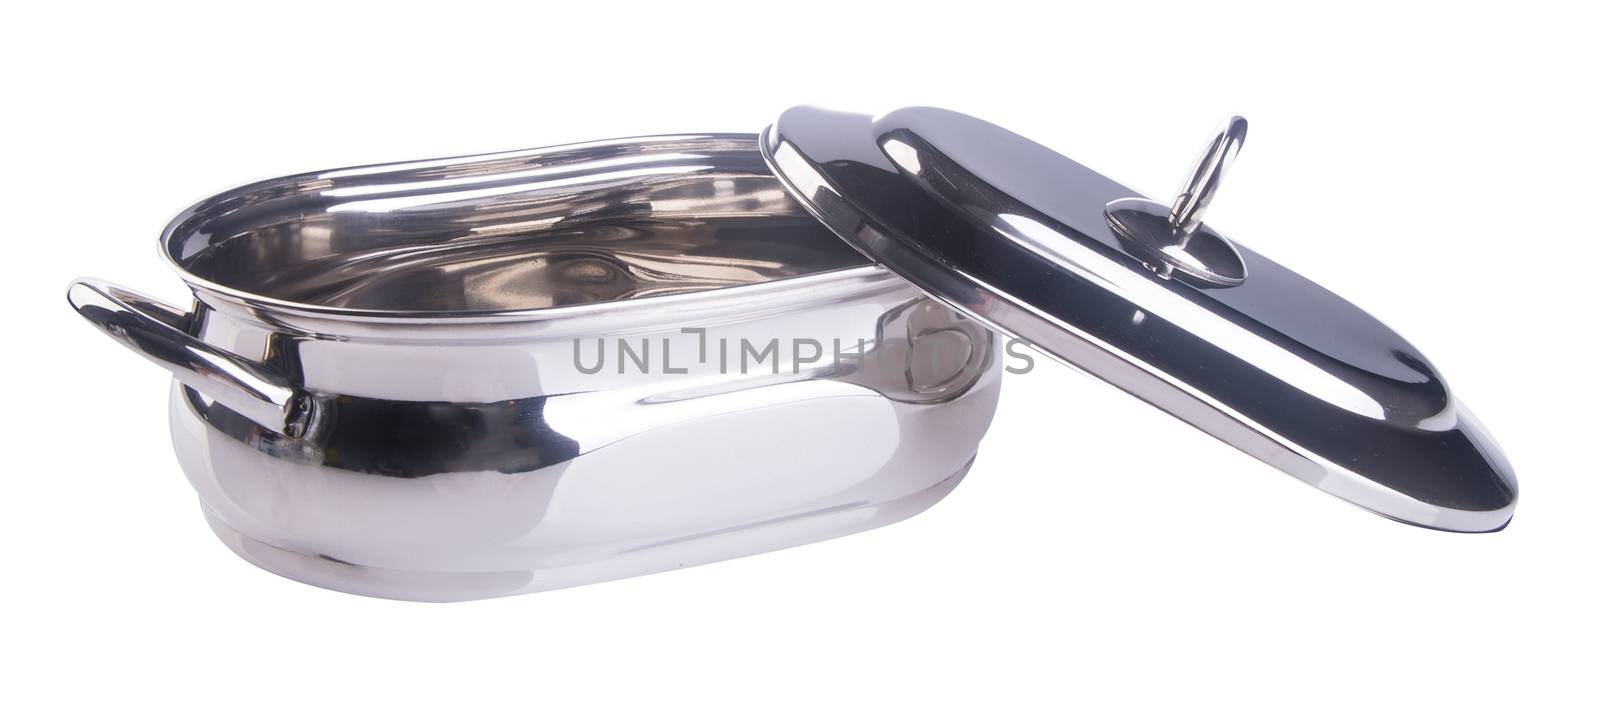 food containers, stainless steel food containers on a background by heinteh